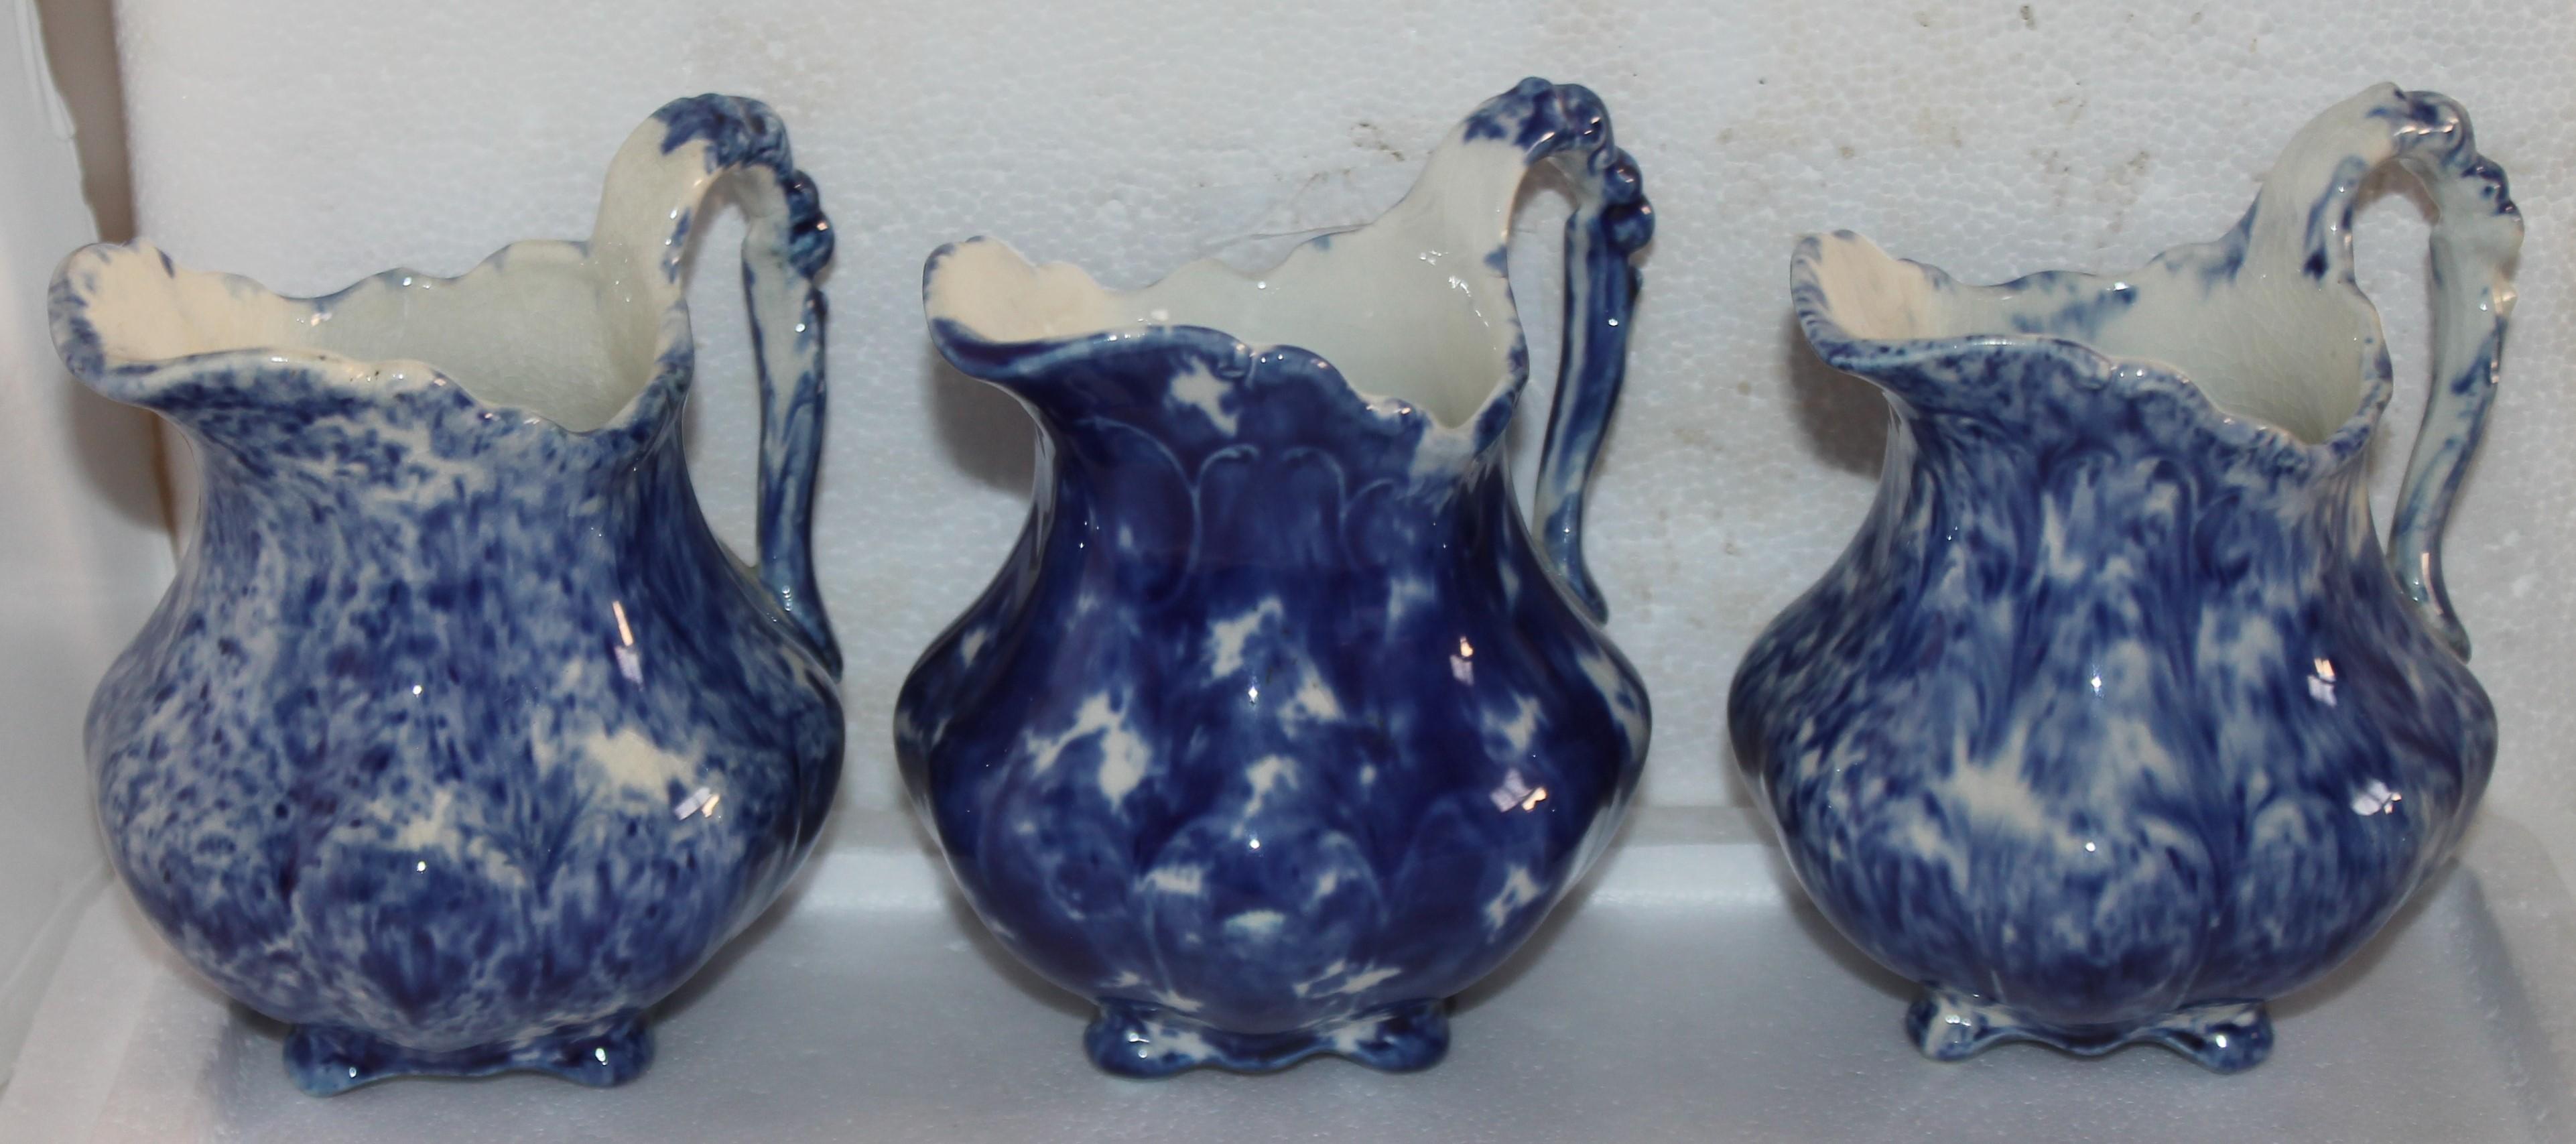 Collection of 19thc Sponge Ware Pitchers, 6 Pieces For Sale 1